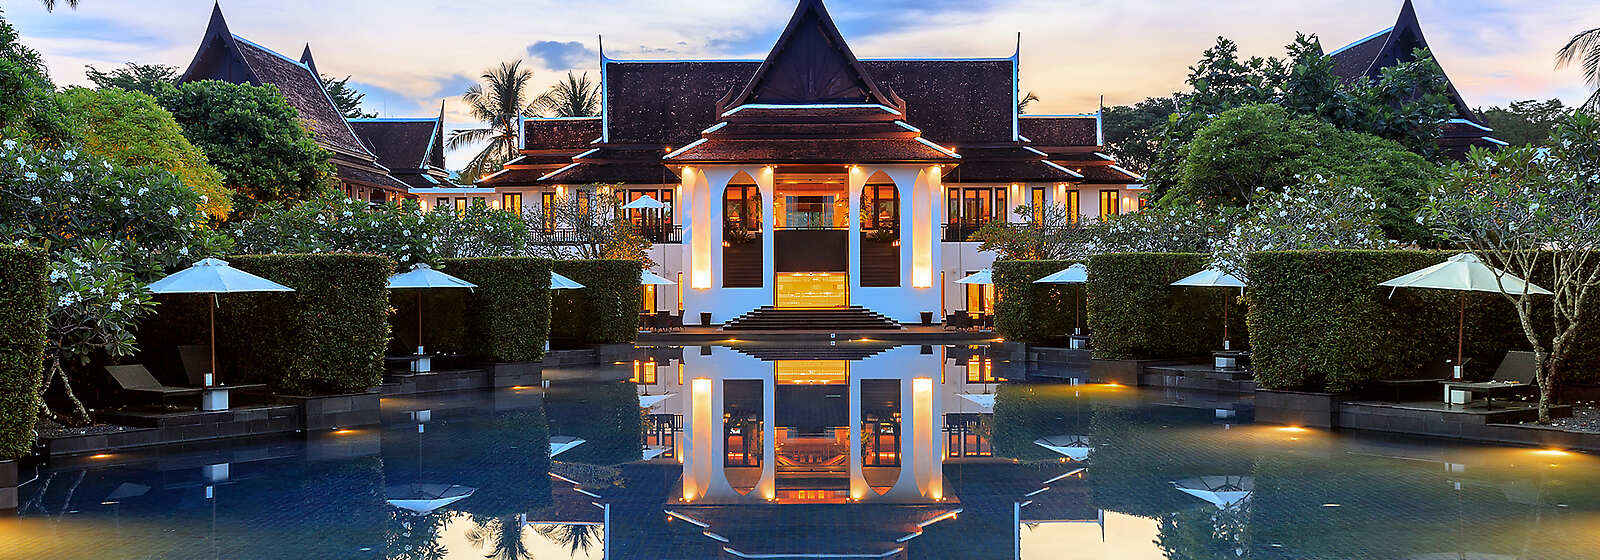 Connect with the stunning beauty of Khao Lak, Thailand at JW Marriott Khao Lak Resort & Spa.